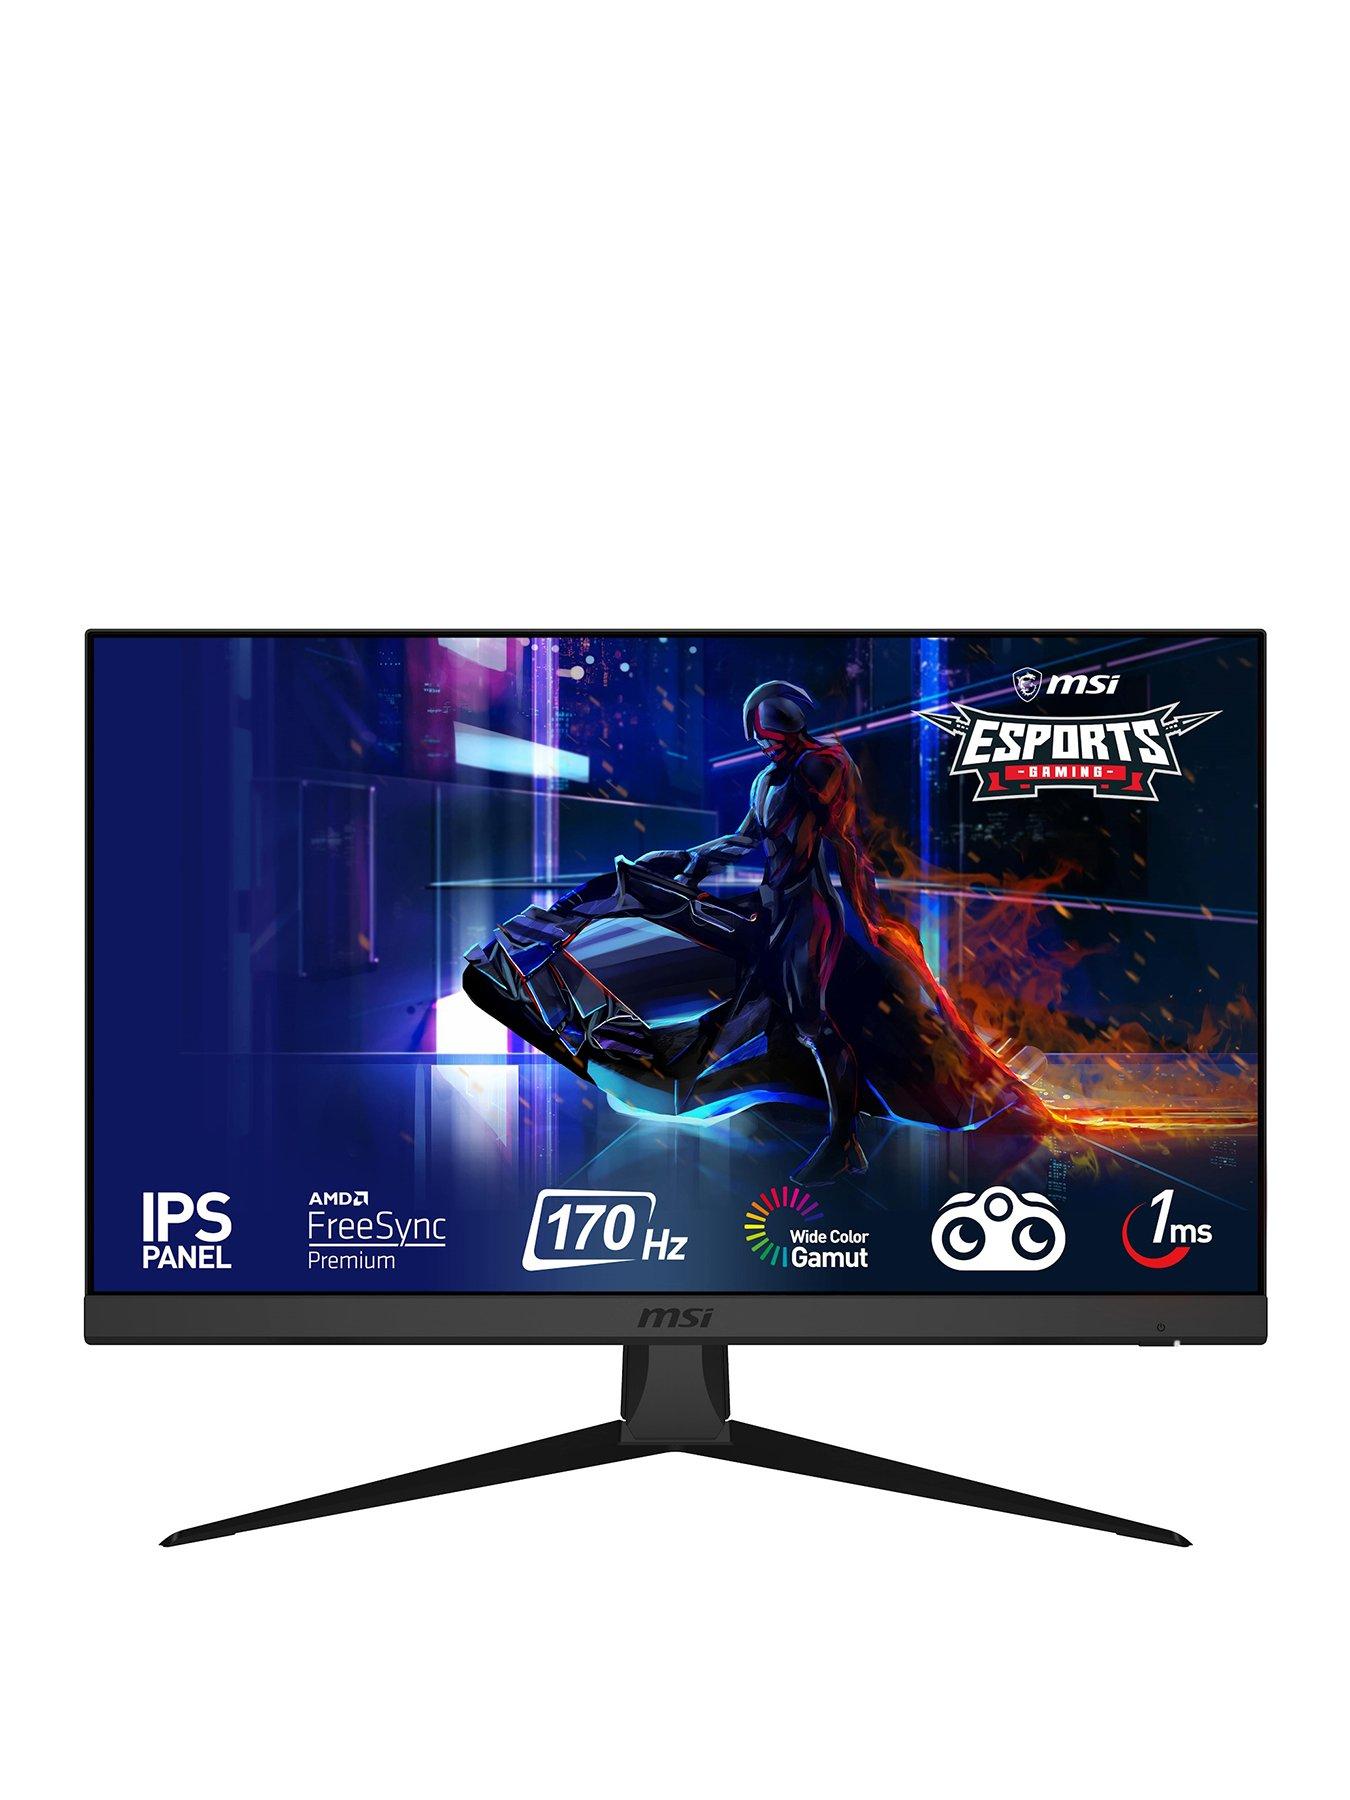 | 144hz, | 1ms | Gaming Ireland | Curved Very 165hz Monitors